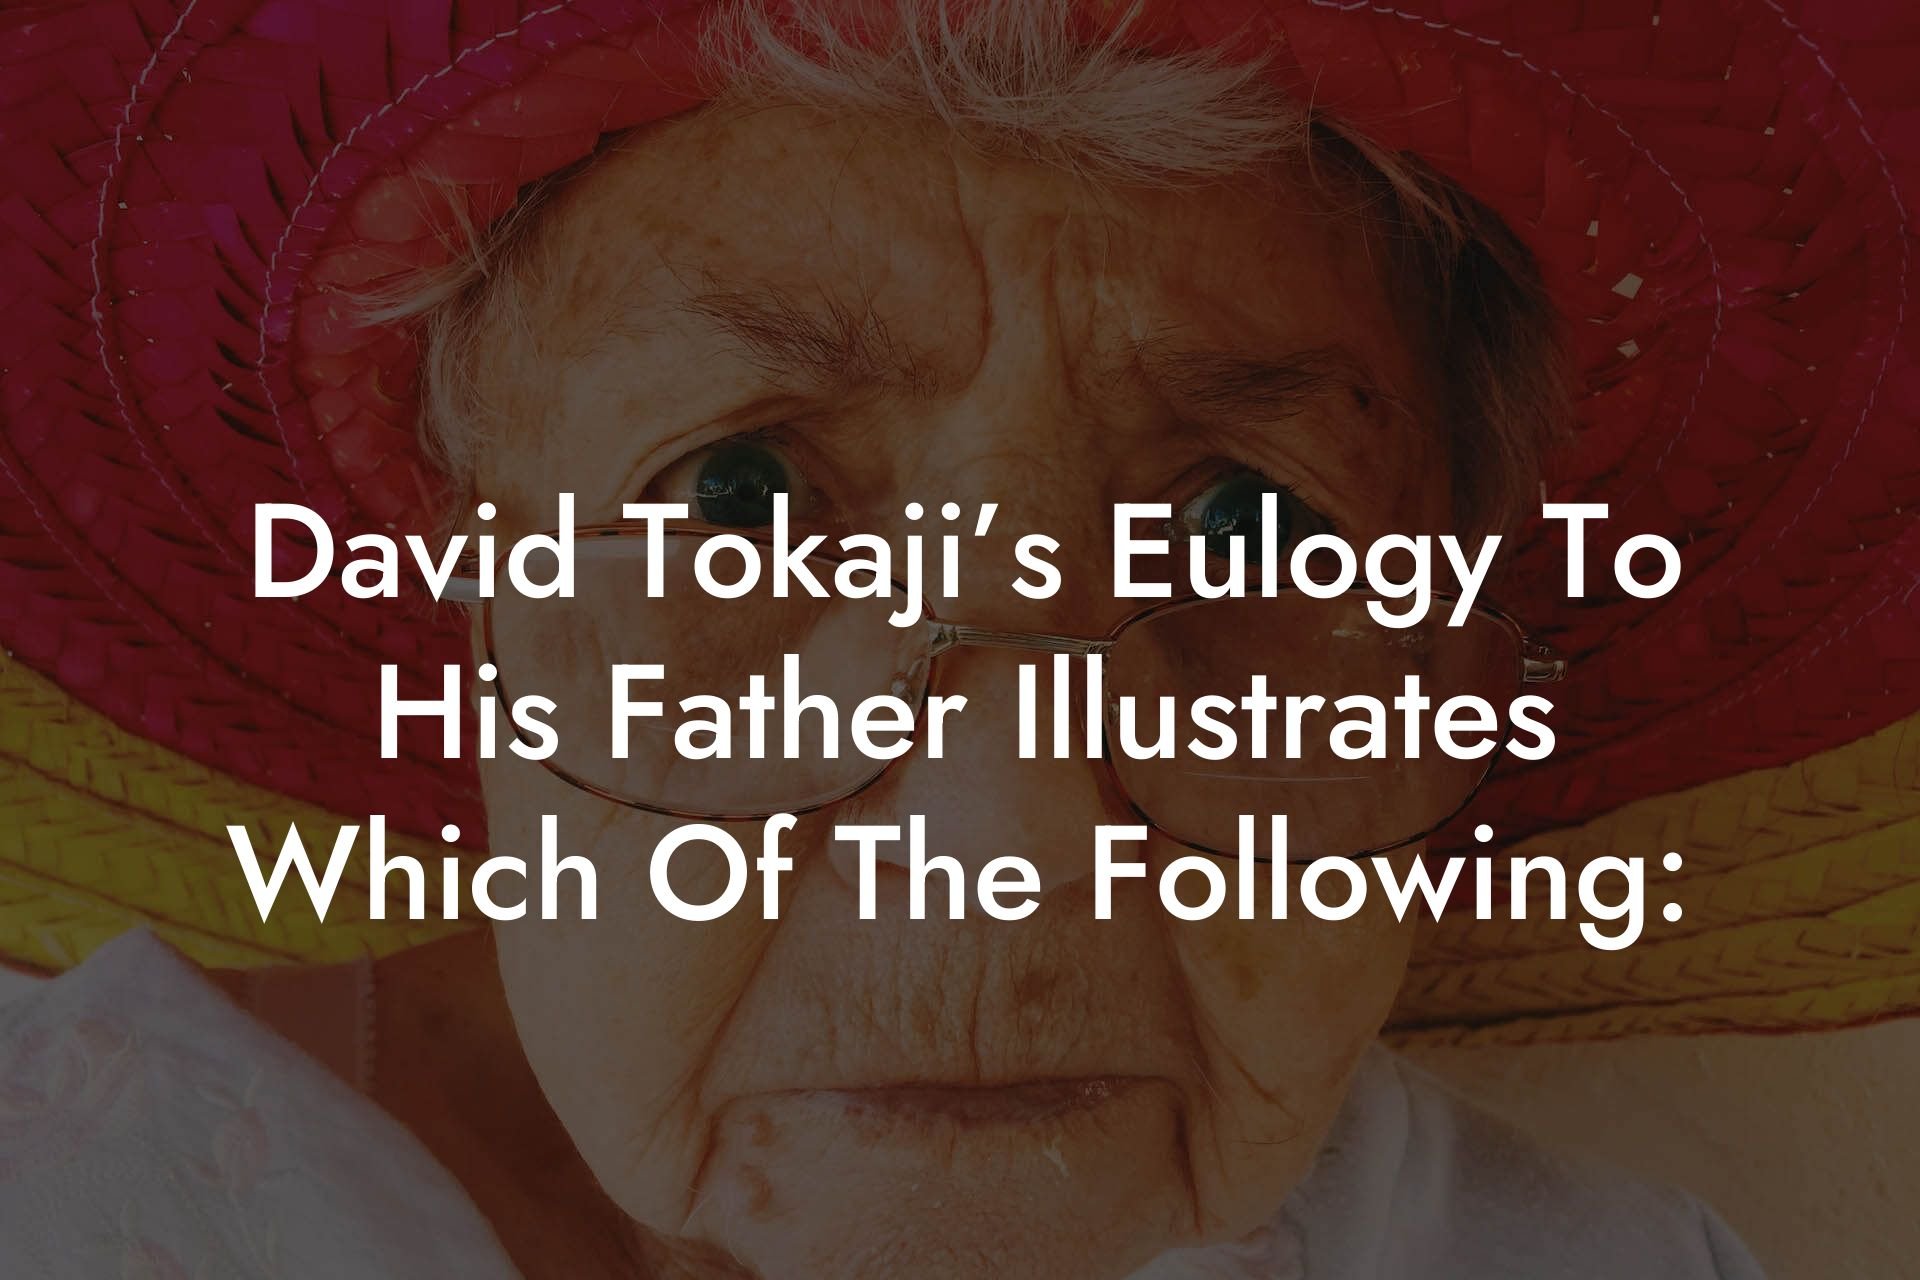 David Tokaji’s Eulogy To His Father Illustrates Which Of The Following